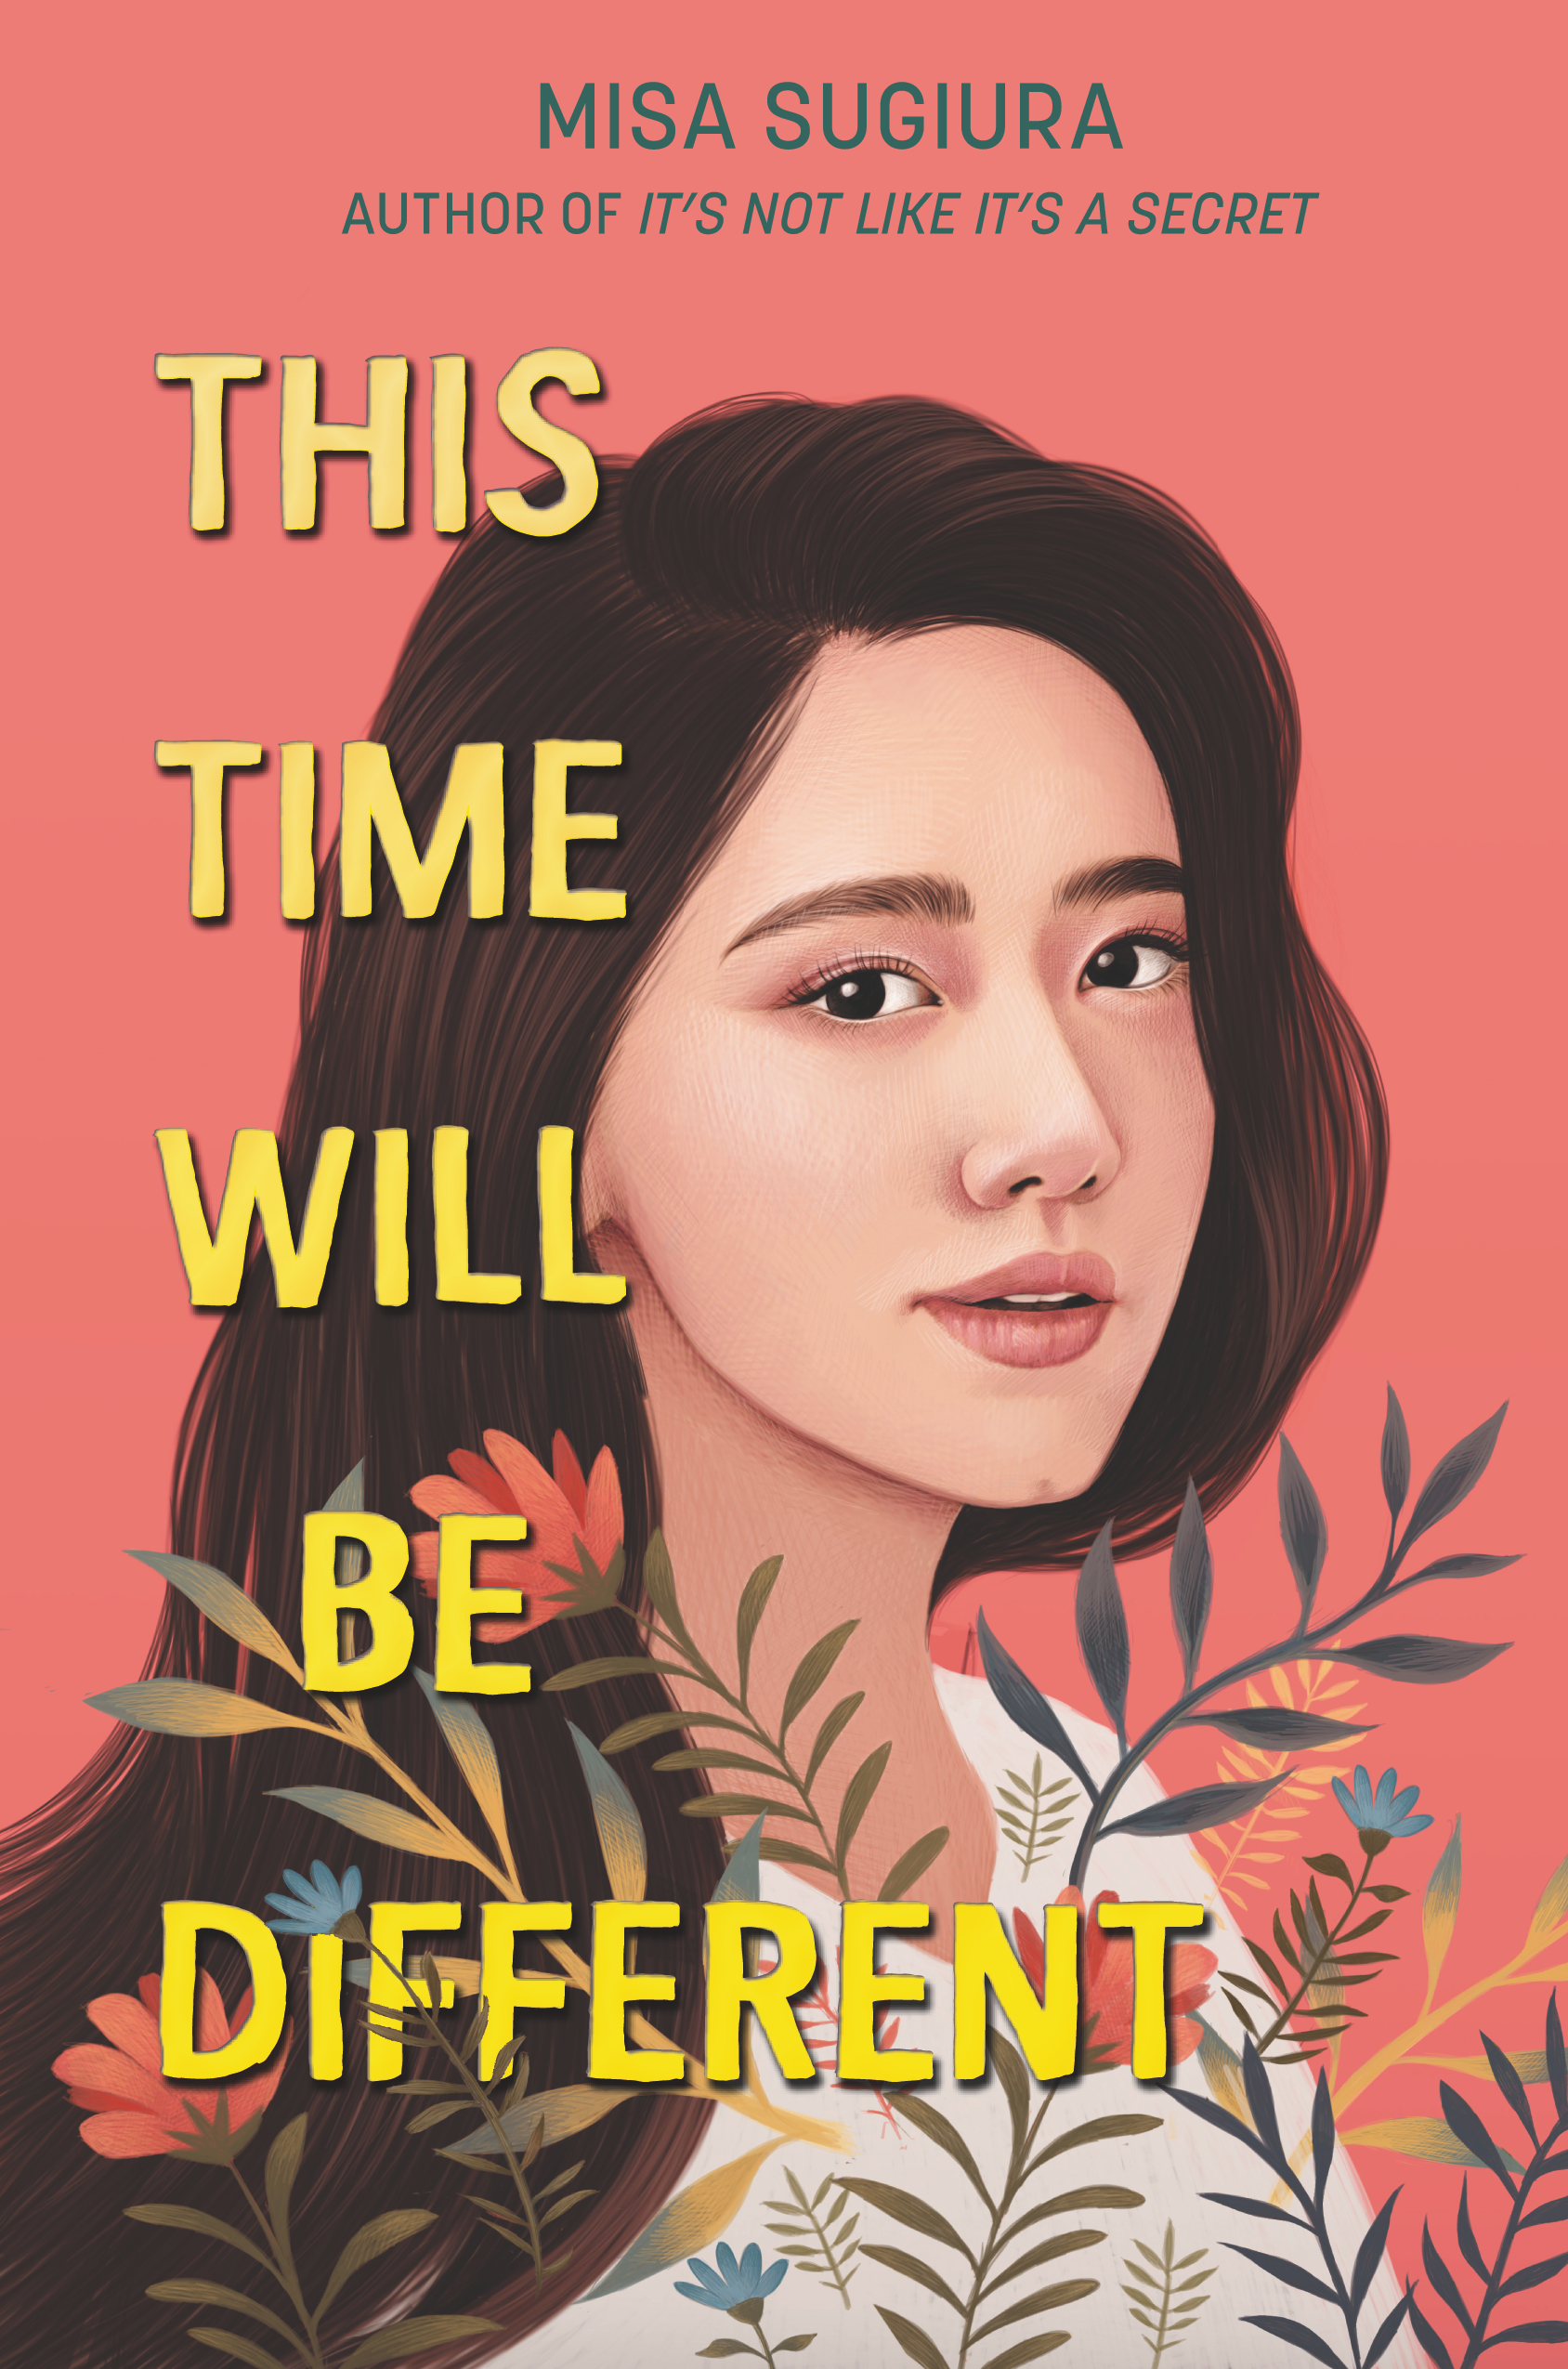 This Time Will Be Different, by Misa Sugiura